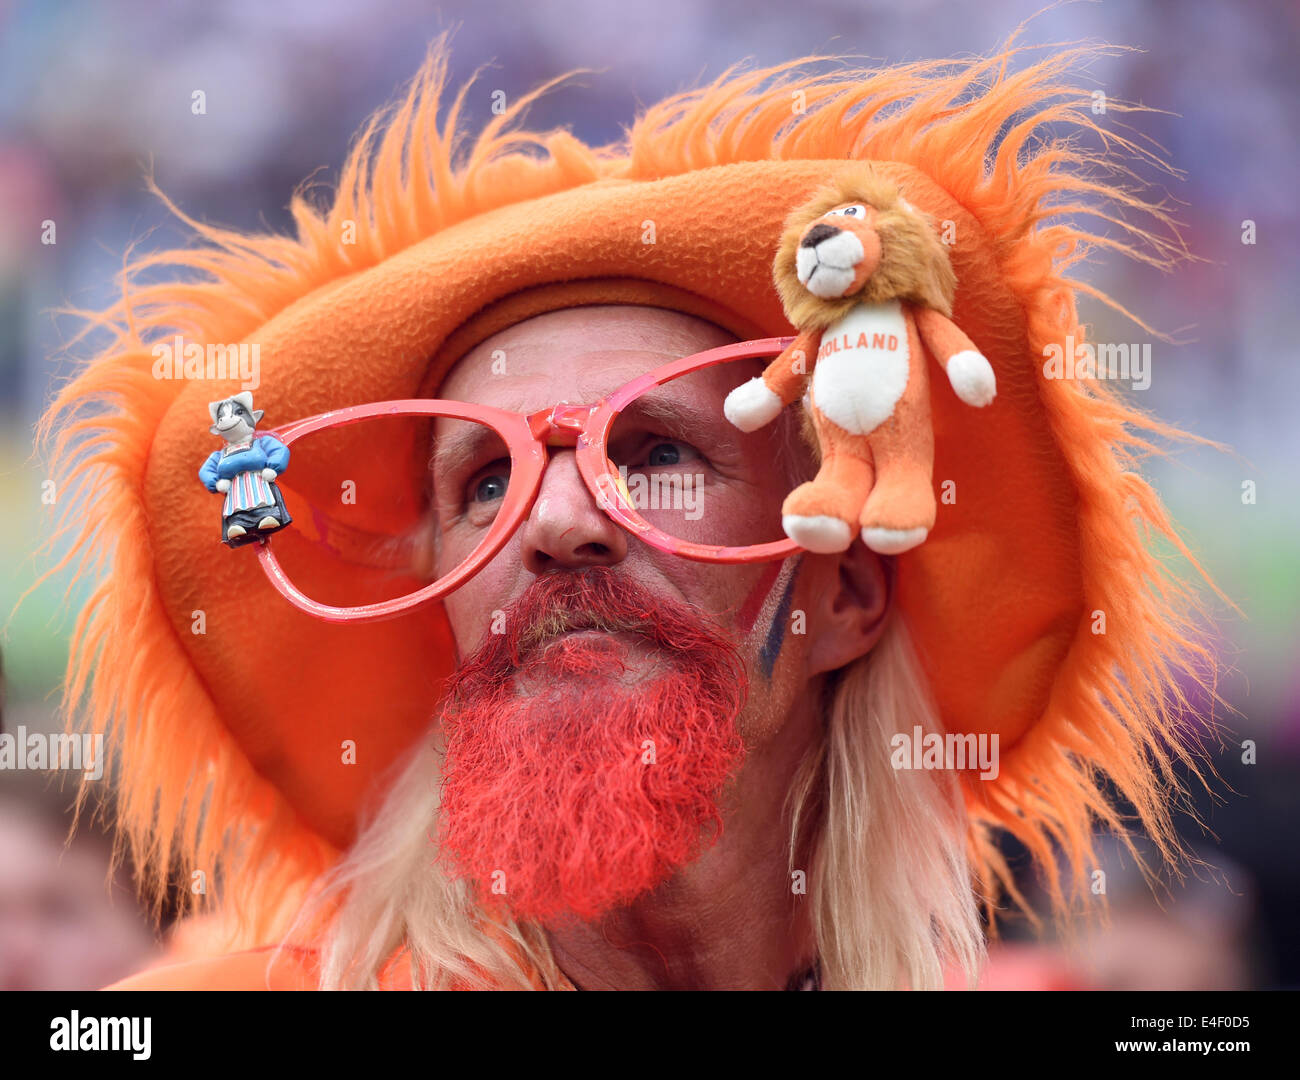 Sao Paulo, Brazil. 09th July, 2014. Supporter of the Netherlands seen before the FIFA World Cup 2014 semi-final soccer match between the Netherlands and Argentina at the Arena Corinthians in Sao Paulo, Brazil, 09 July 2014. Photo: Marius Becker/dpa/Alamy Live News Stock Photo